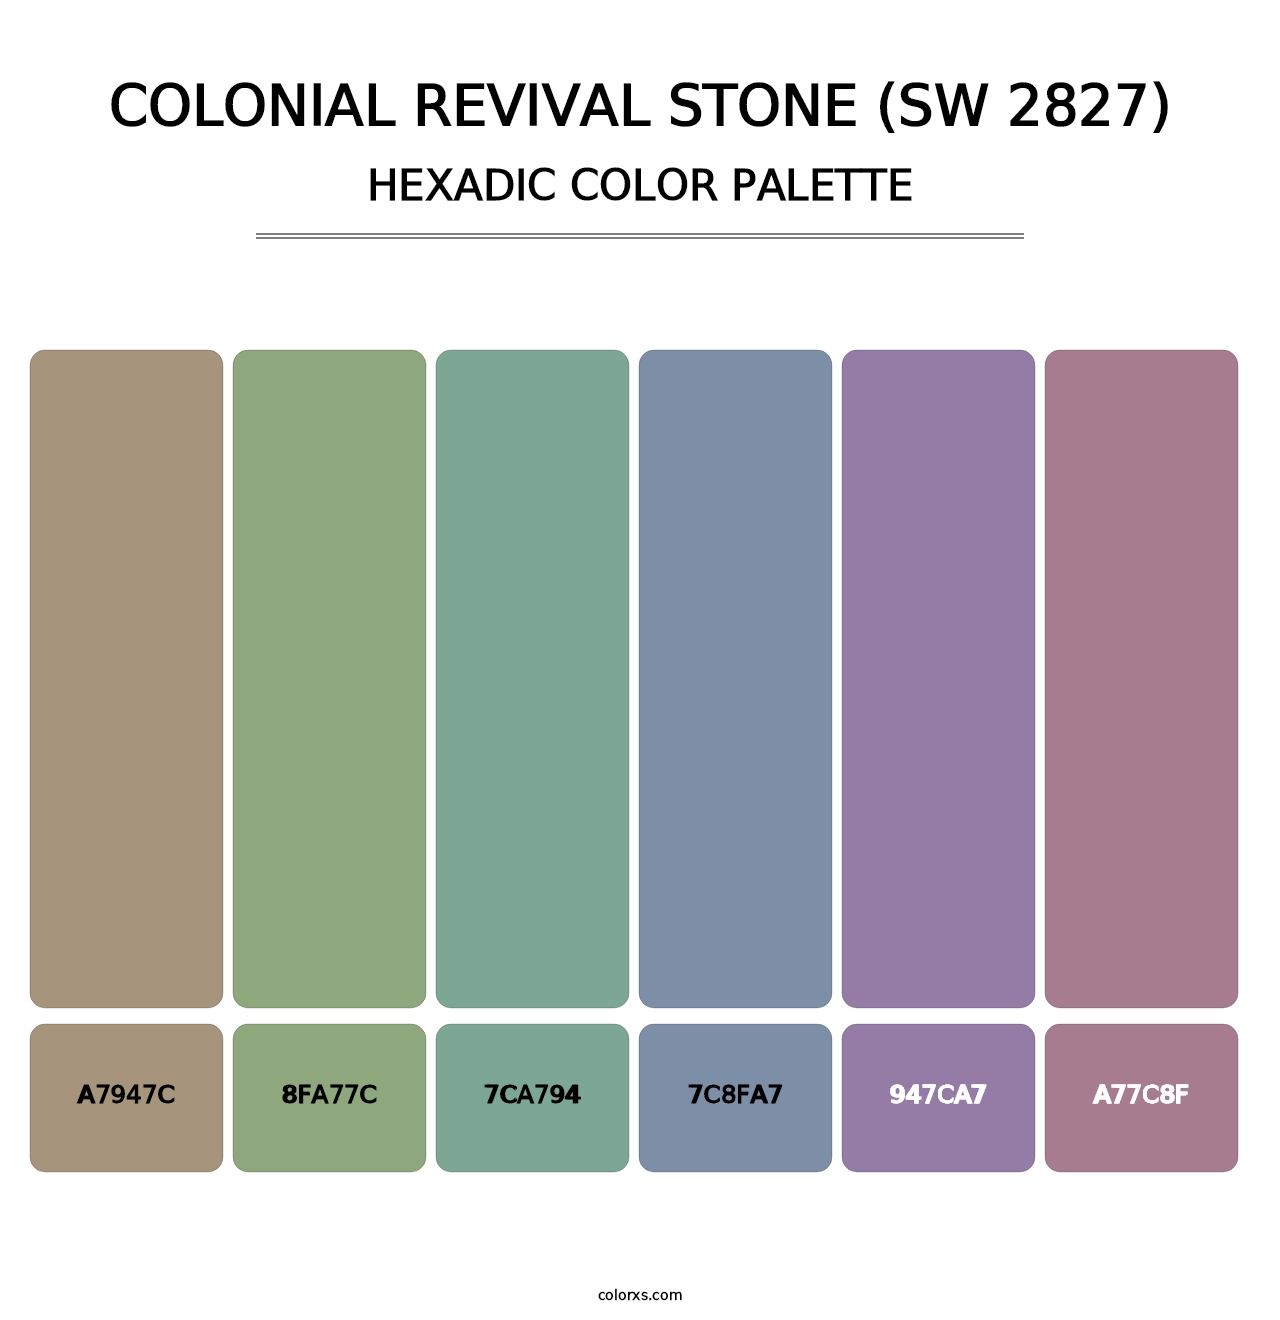 Colonial Revival Stone (SW 2827) - Hexadic Color Palette